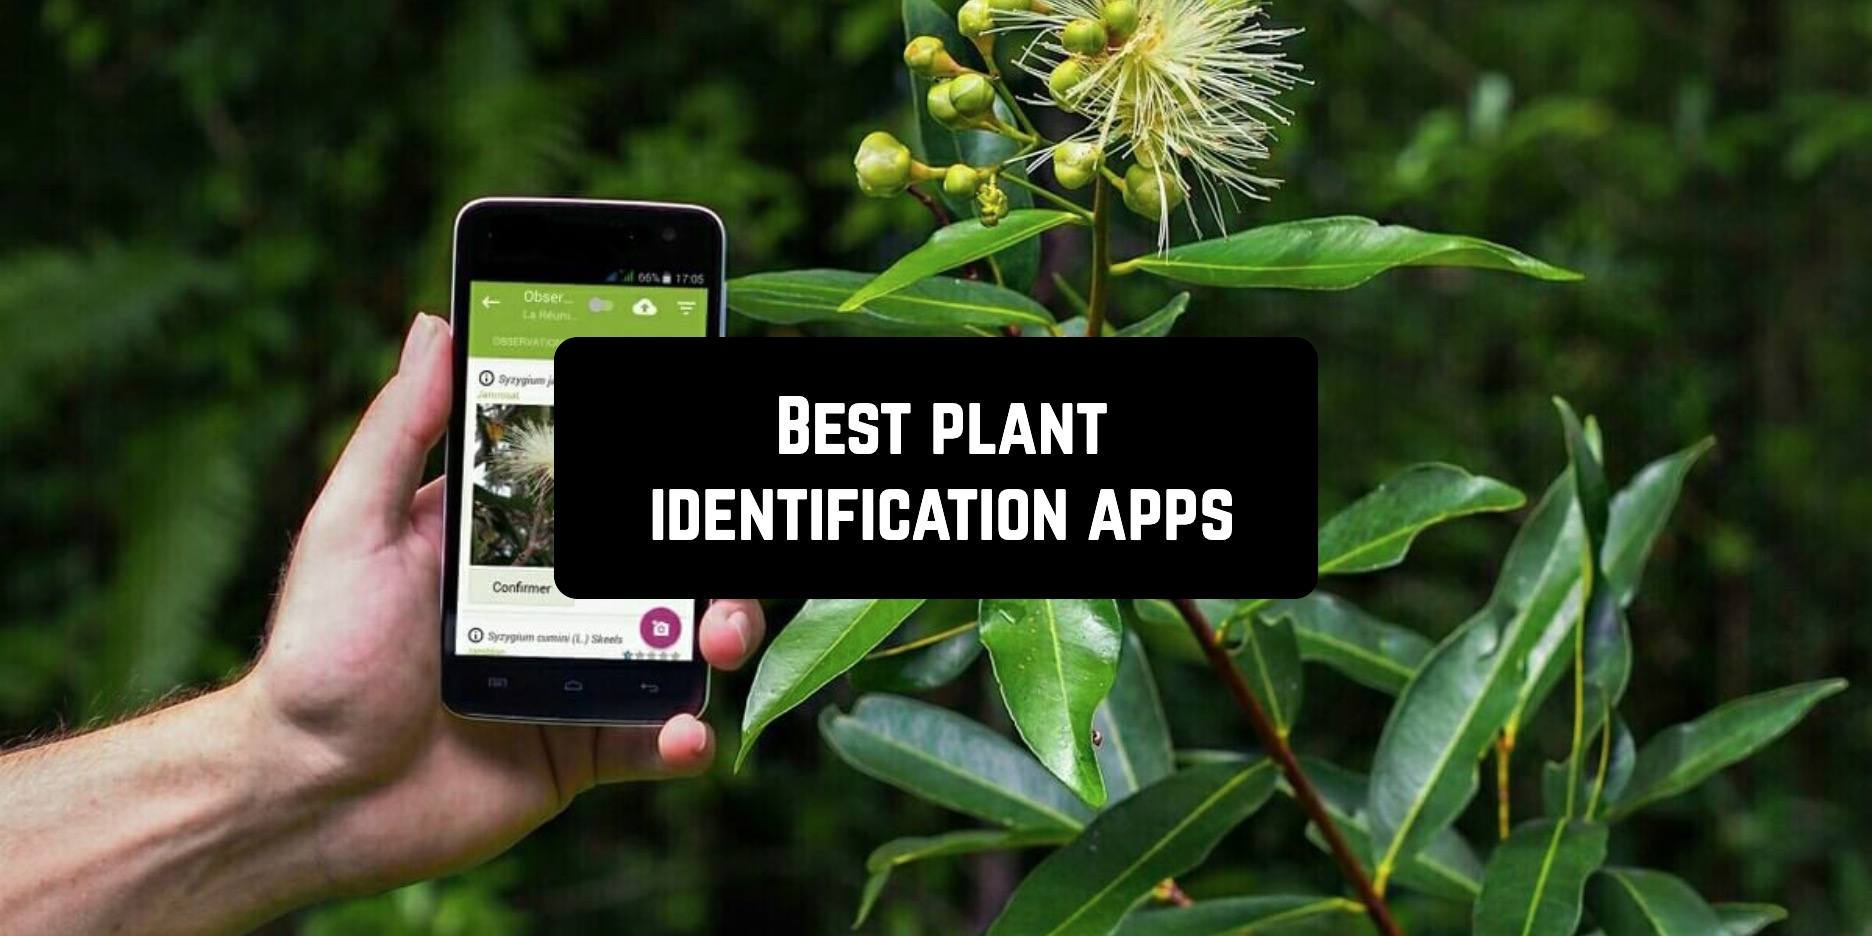 7 Best Plant Identification Apps For Android Android Apps For Me Download Best Android Apps And More